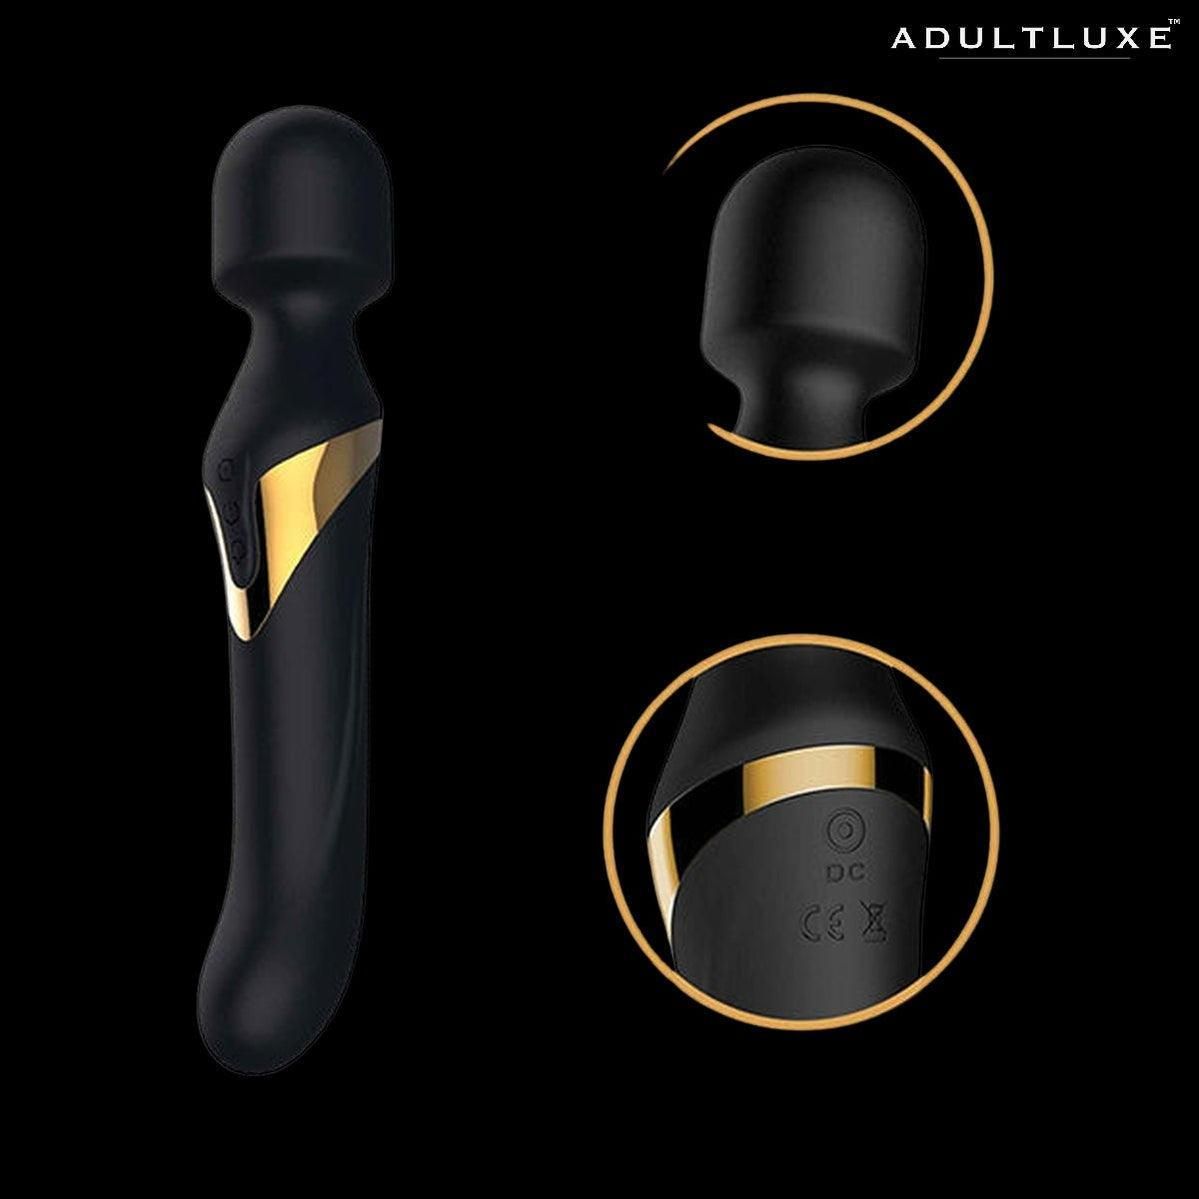 Dorcel Dual Orgasms Wand Vibrator - AdultLuxe